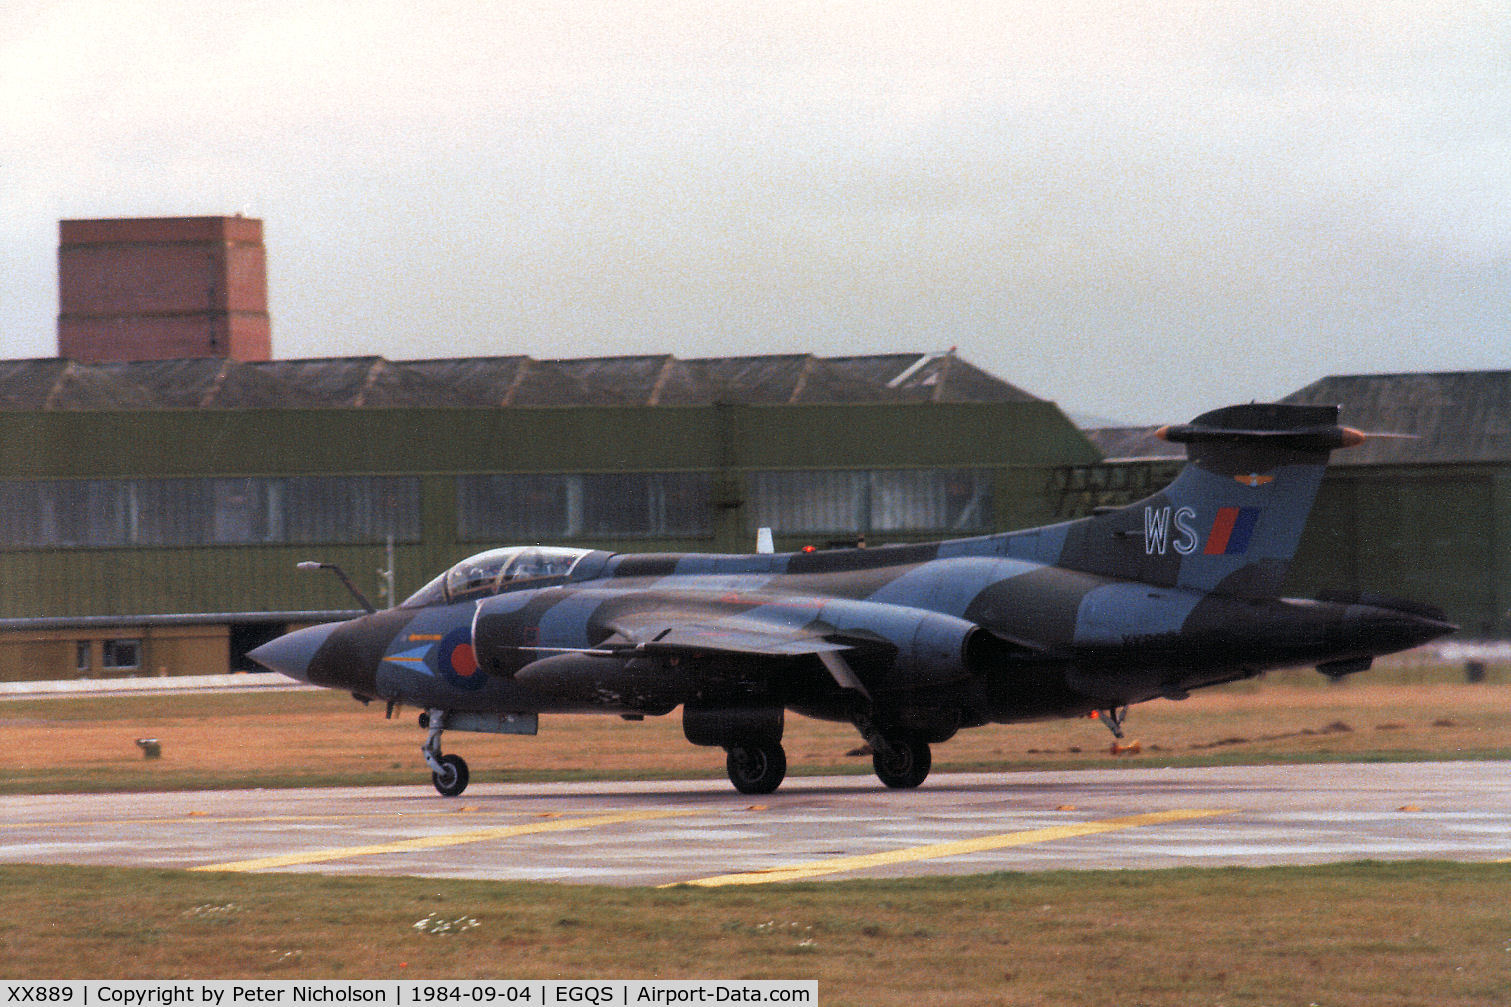 XX889, 1974 Hawker Siddeley Buccaneer S.2B C/N B3-05-73, Buccaneer S.2B of 208 Squadron returning to base after a mission in September 1984.